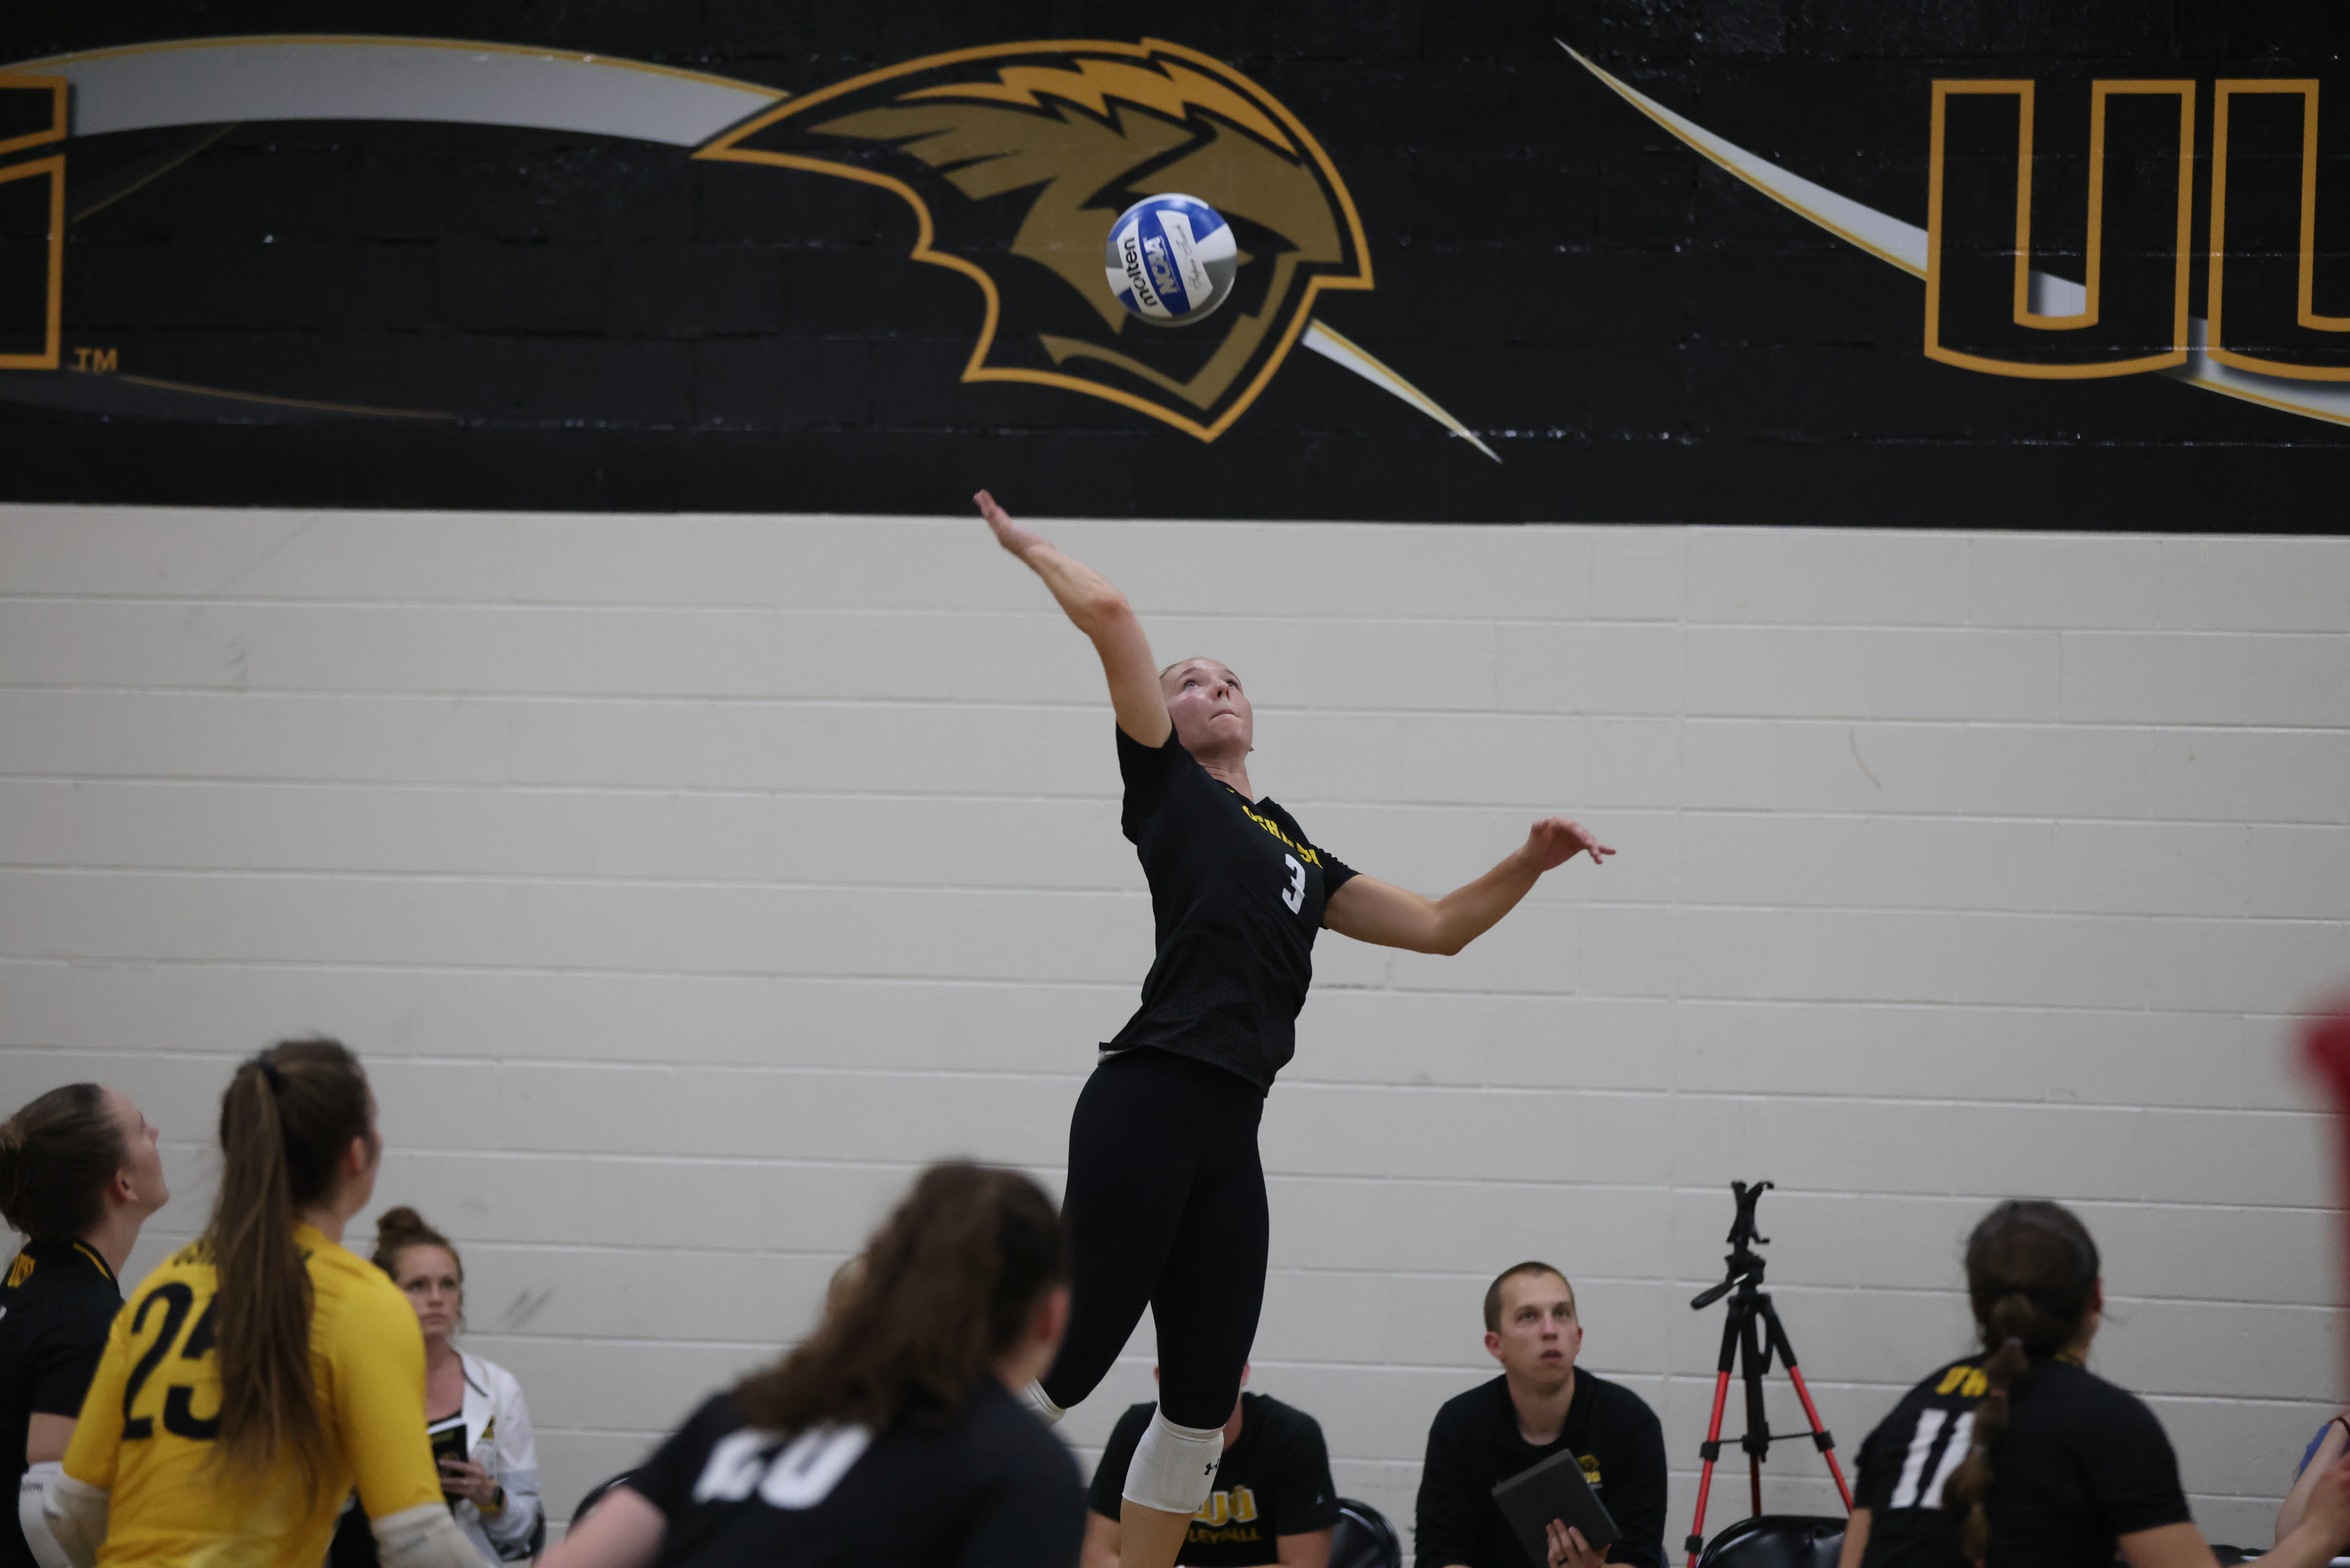 Carissa Sundholm had 28 total kills Saturday and was named to the M.V.P. Invitational All-Tournament Team.